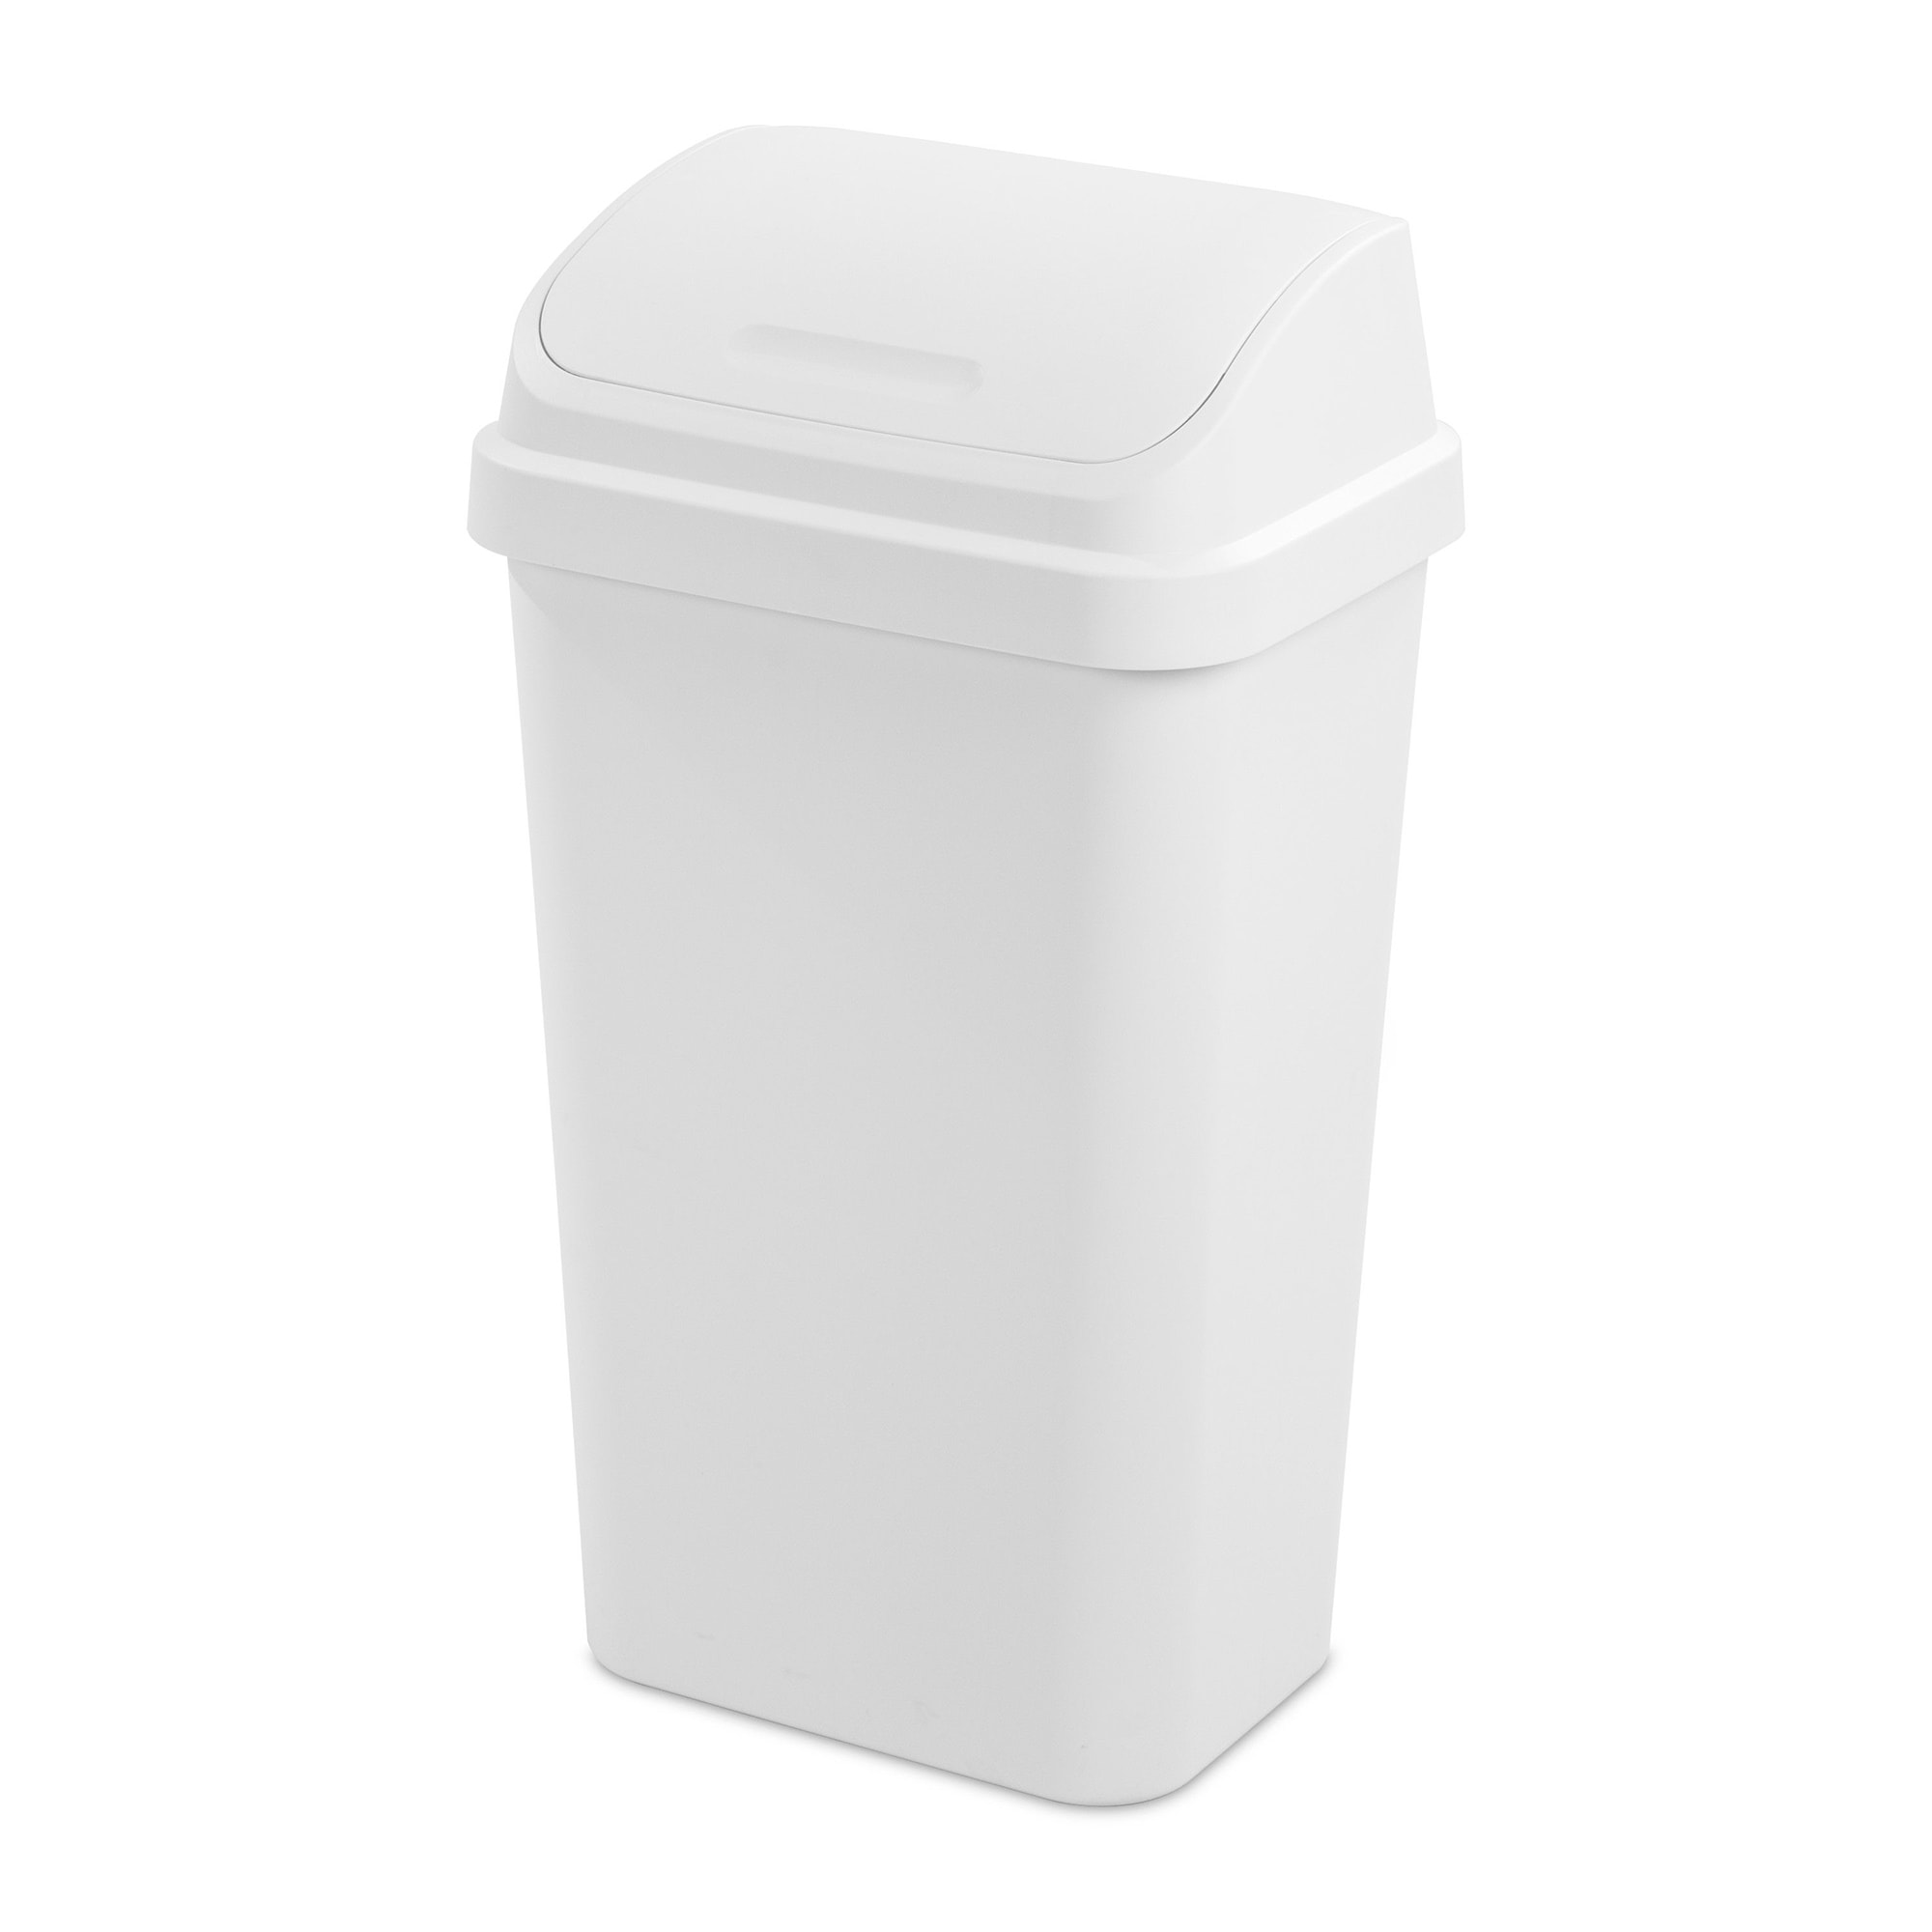 Rubbermaid Spring Top Kitchen Bathroom Trash Can with Lid, 13 Gallon Gray  Plastic Garbage Bin, 49.2-liter